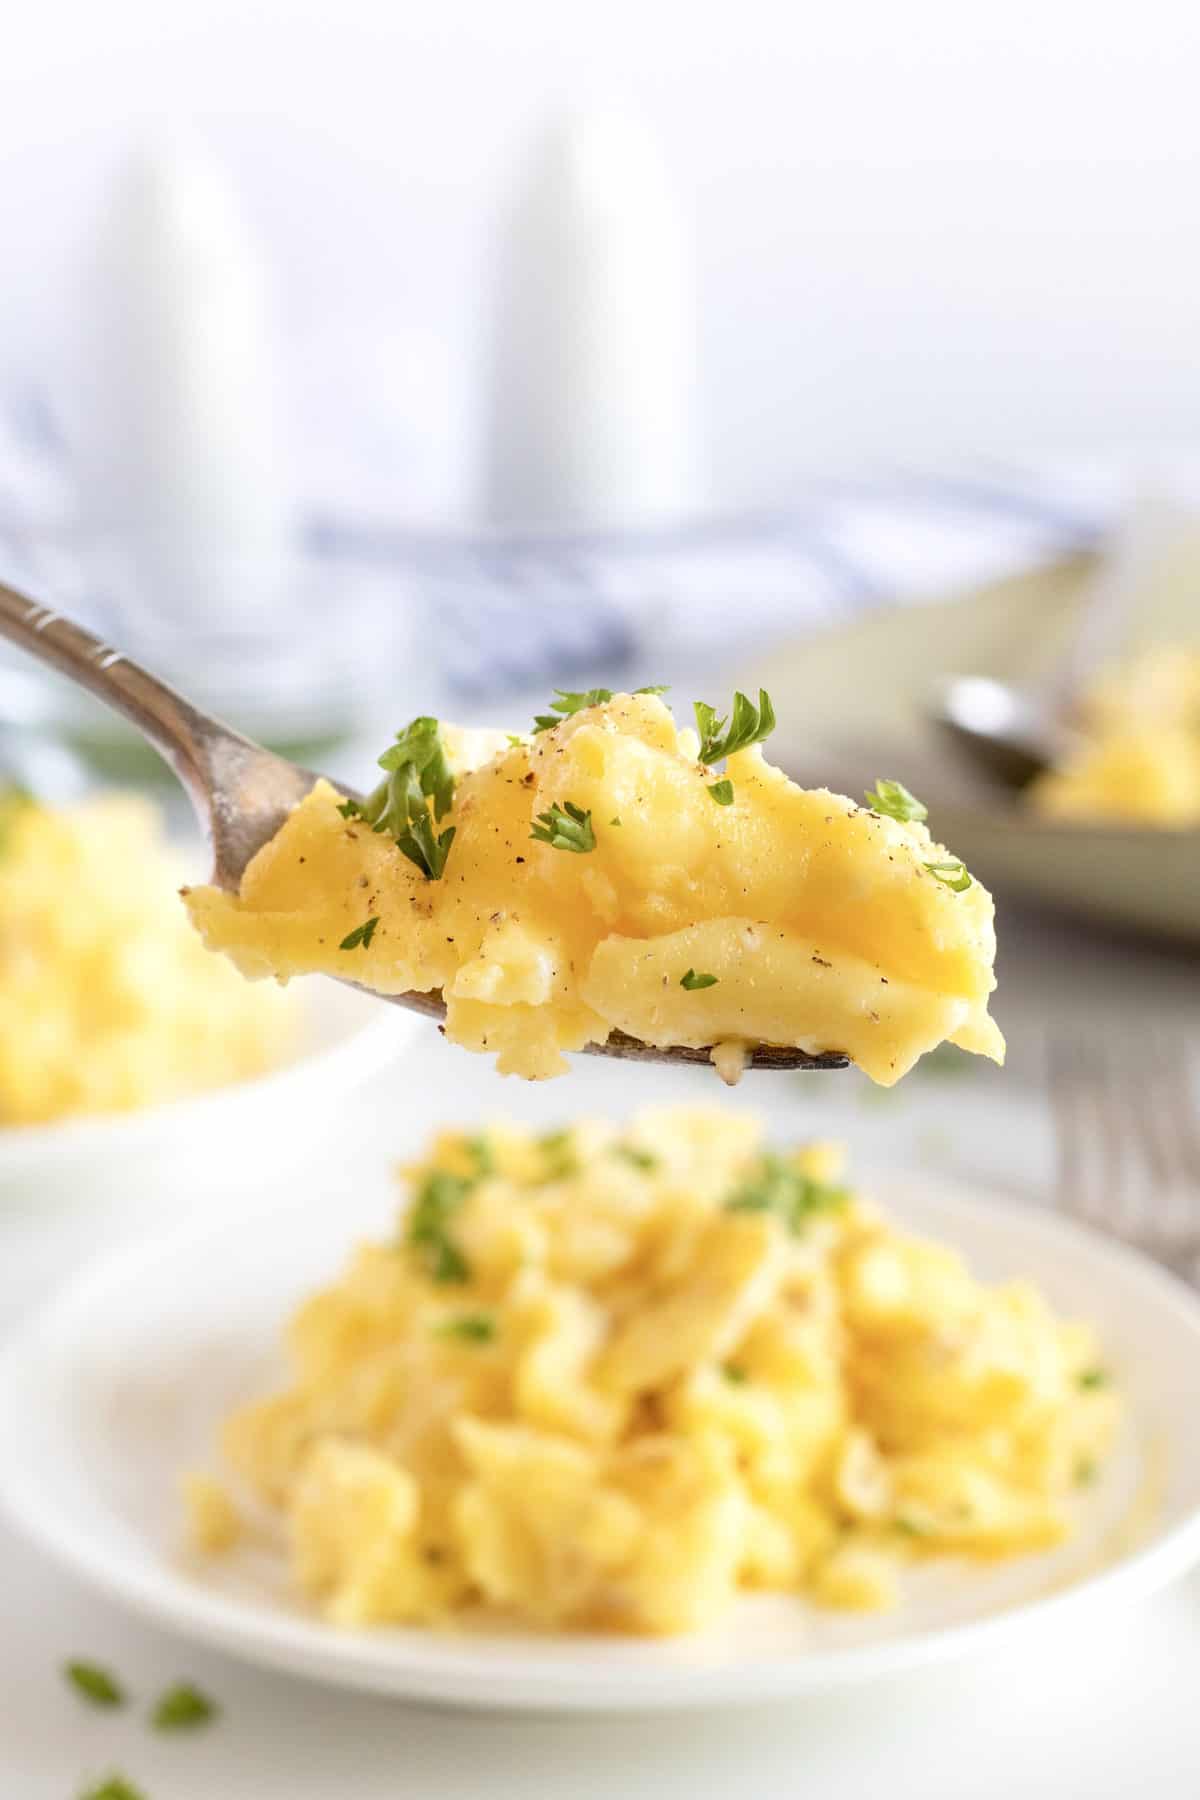 How to Soft Scramble Eggs by The BakerMama